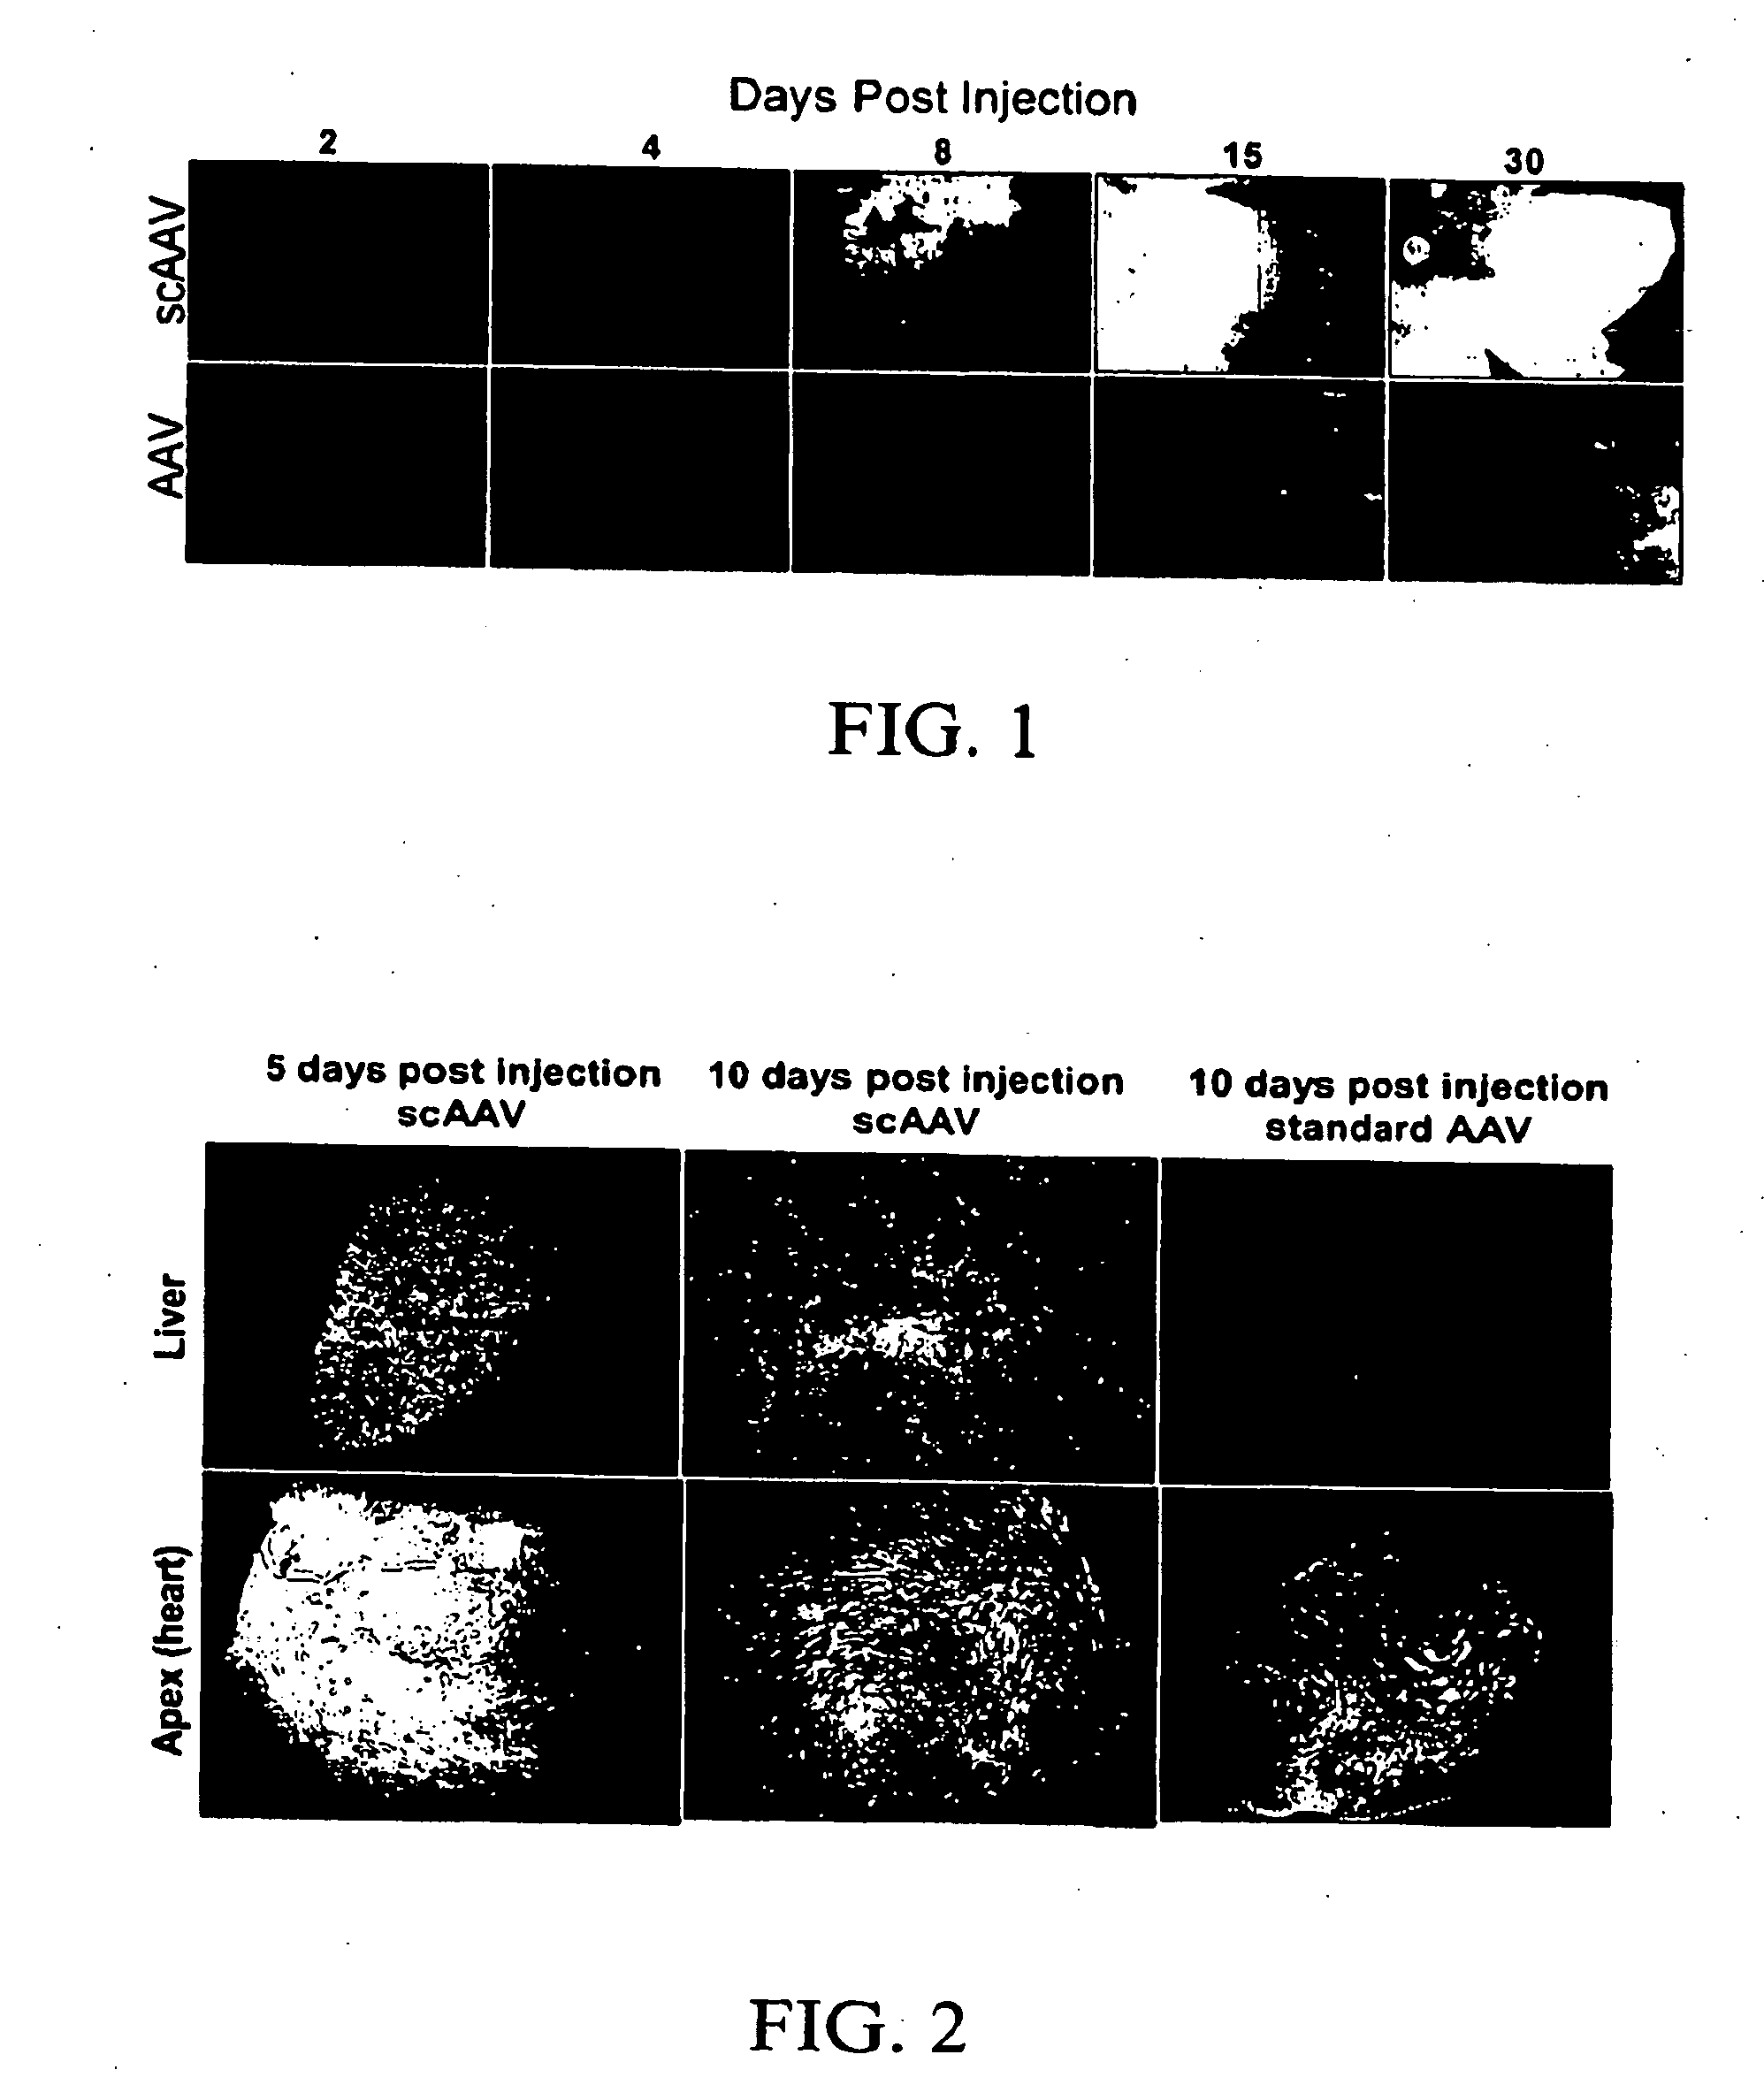 Double-stranded/self-complementary vectors with a truncated cba promoter and methods of gene delivery